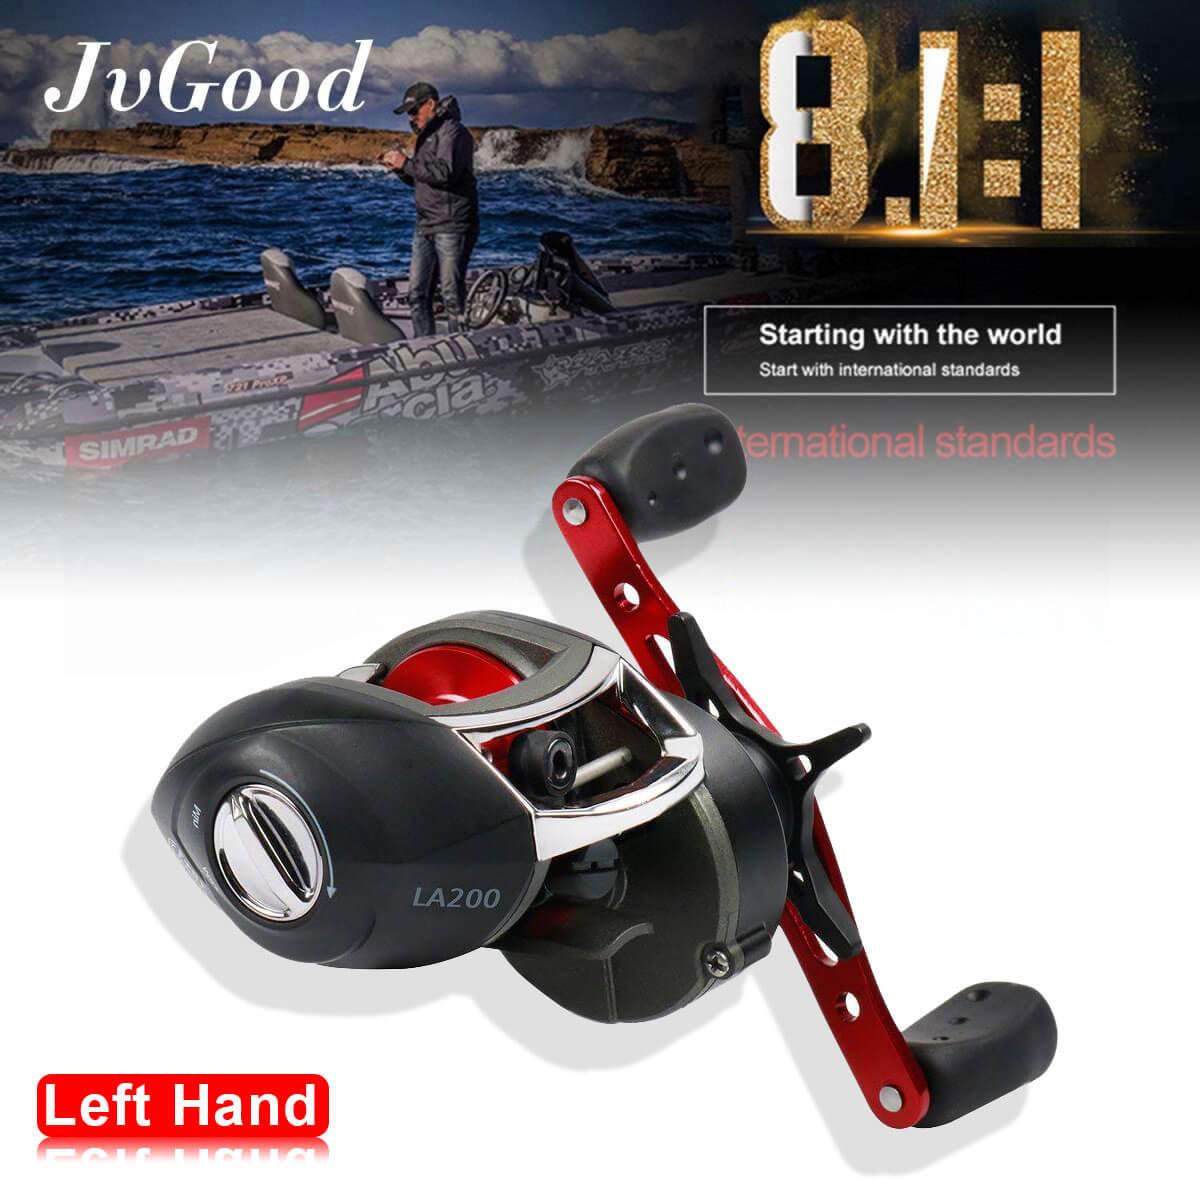 JvGood Spinning Fishing Reels, Baitcasting Reel Right/Left Fish Reel with High speed 8.1:1